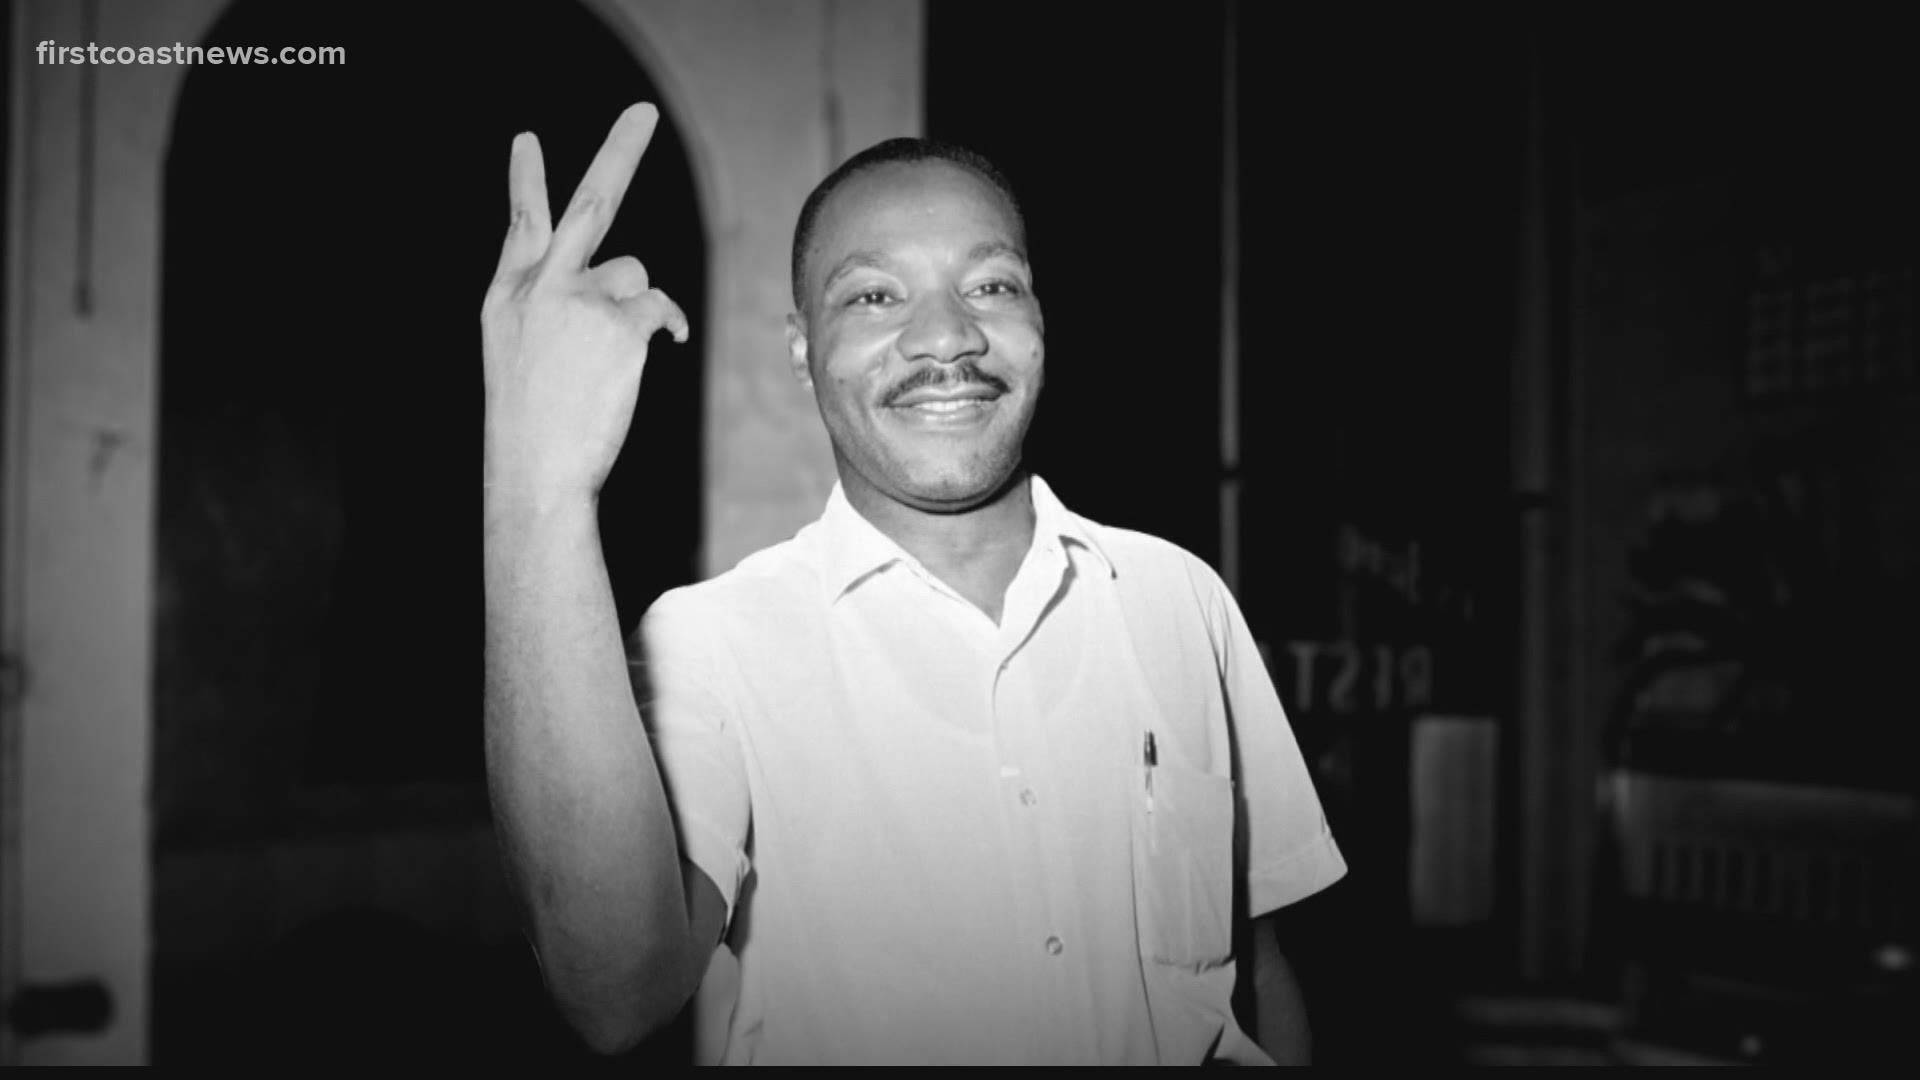 Dr. King was arrested in St. Augustine in 1964 for trying to eat at a segregated restaurant. He was later moved to Jacksonville for his safety.